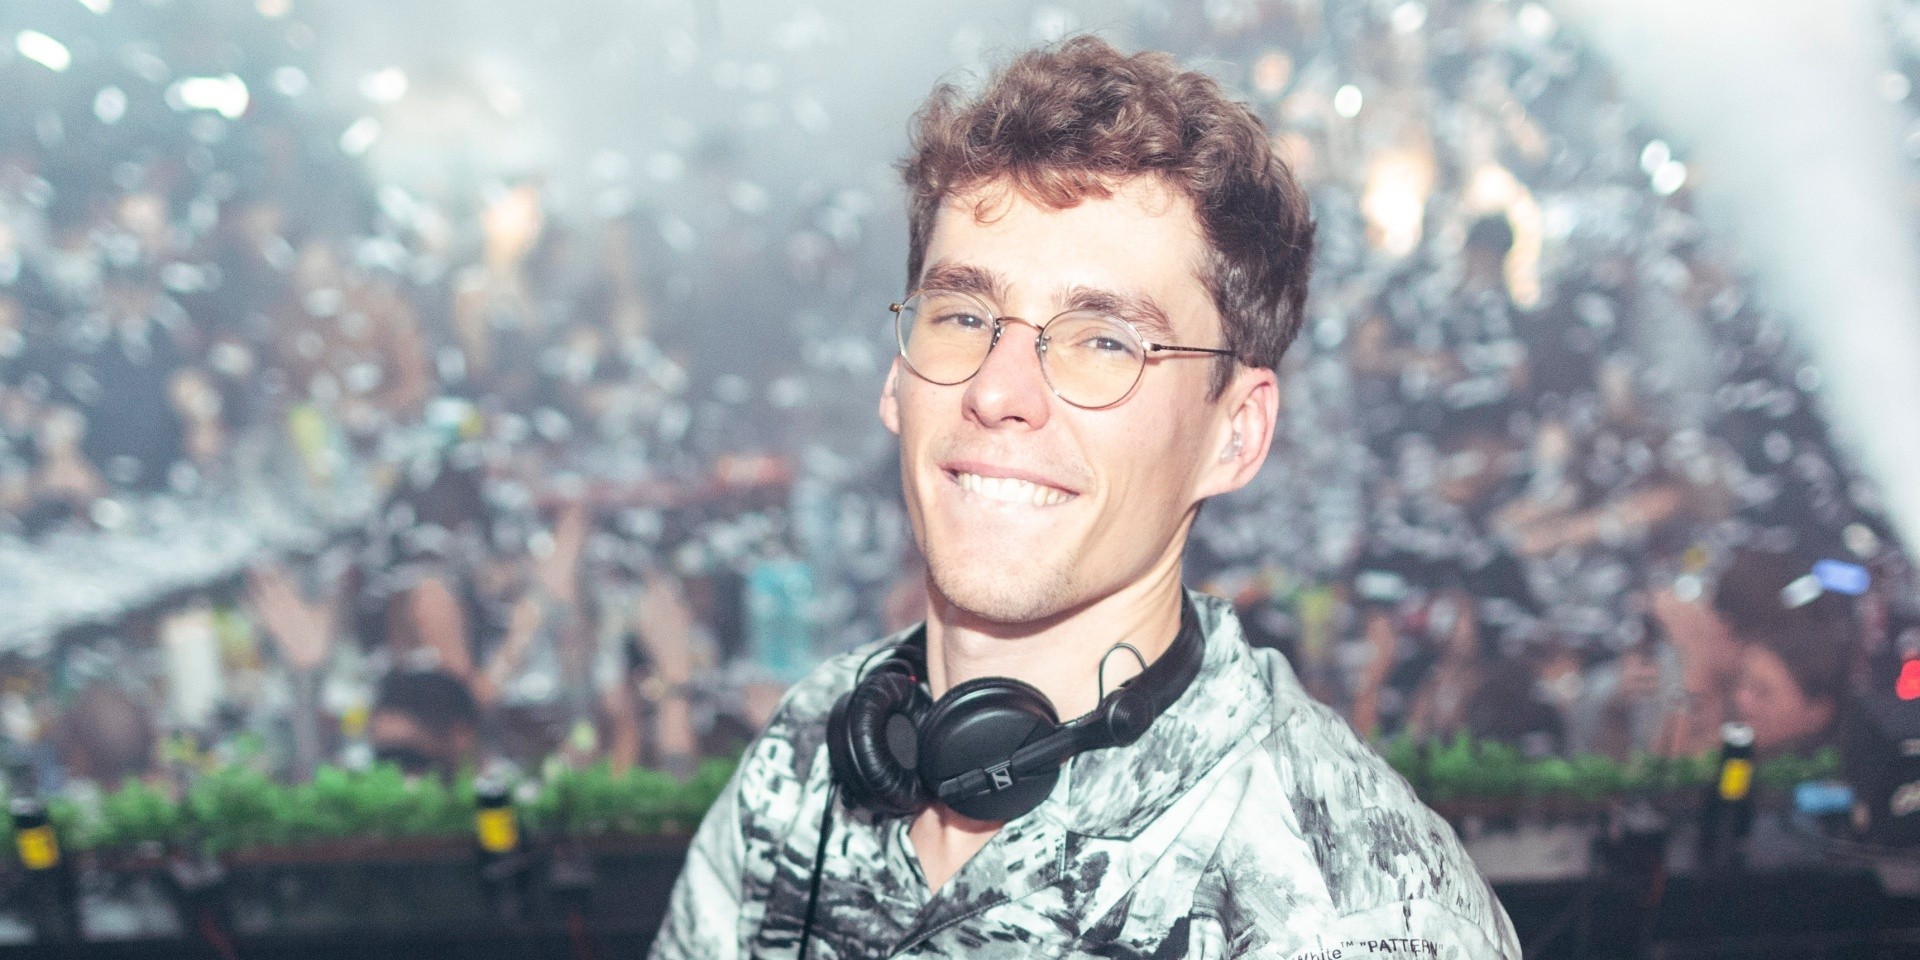 "I go a little crazy sometimes": An interview with Lost Frequencies